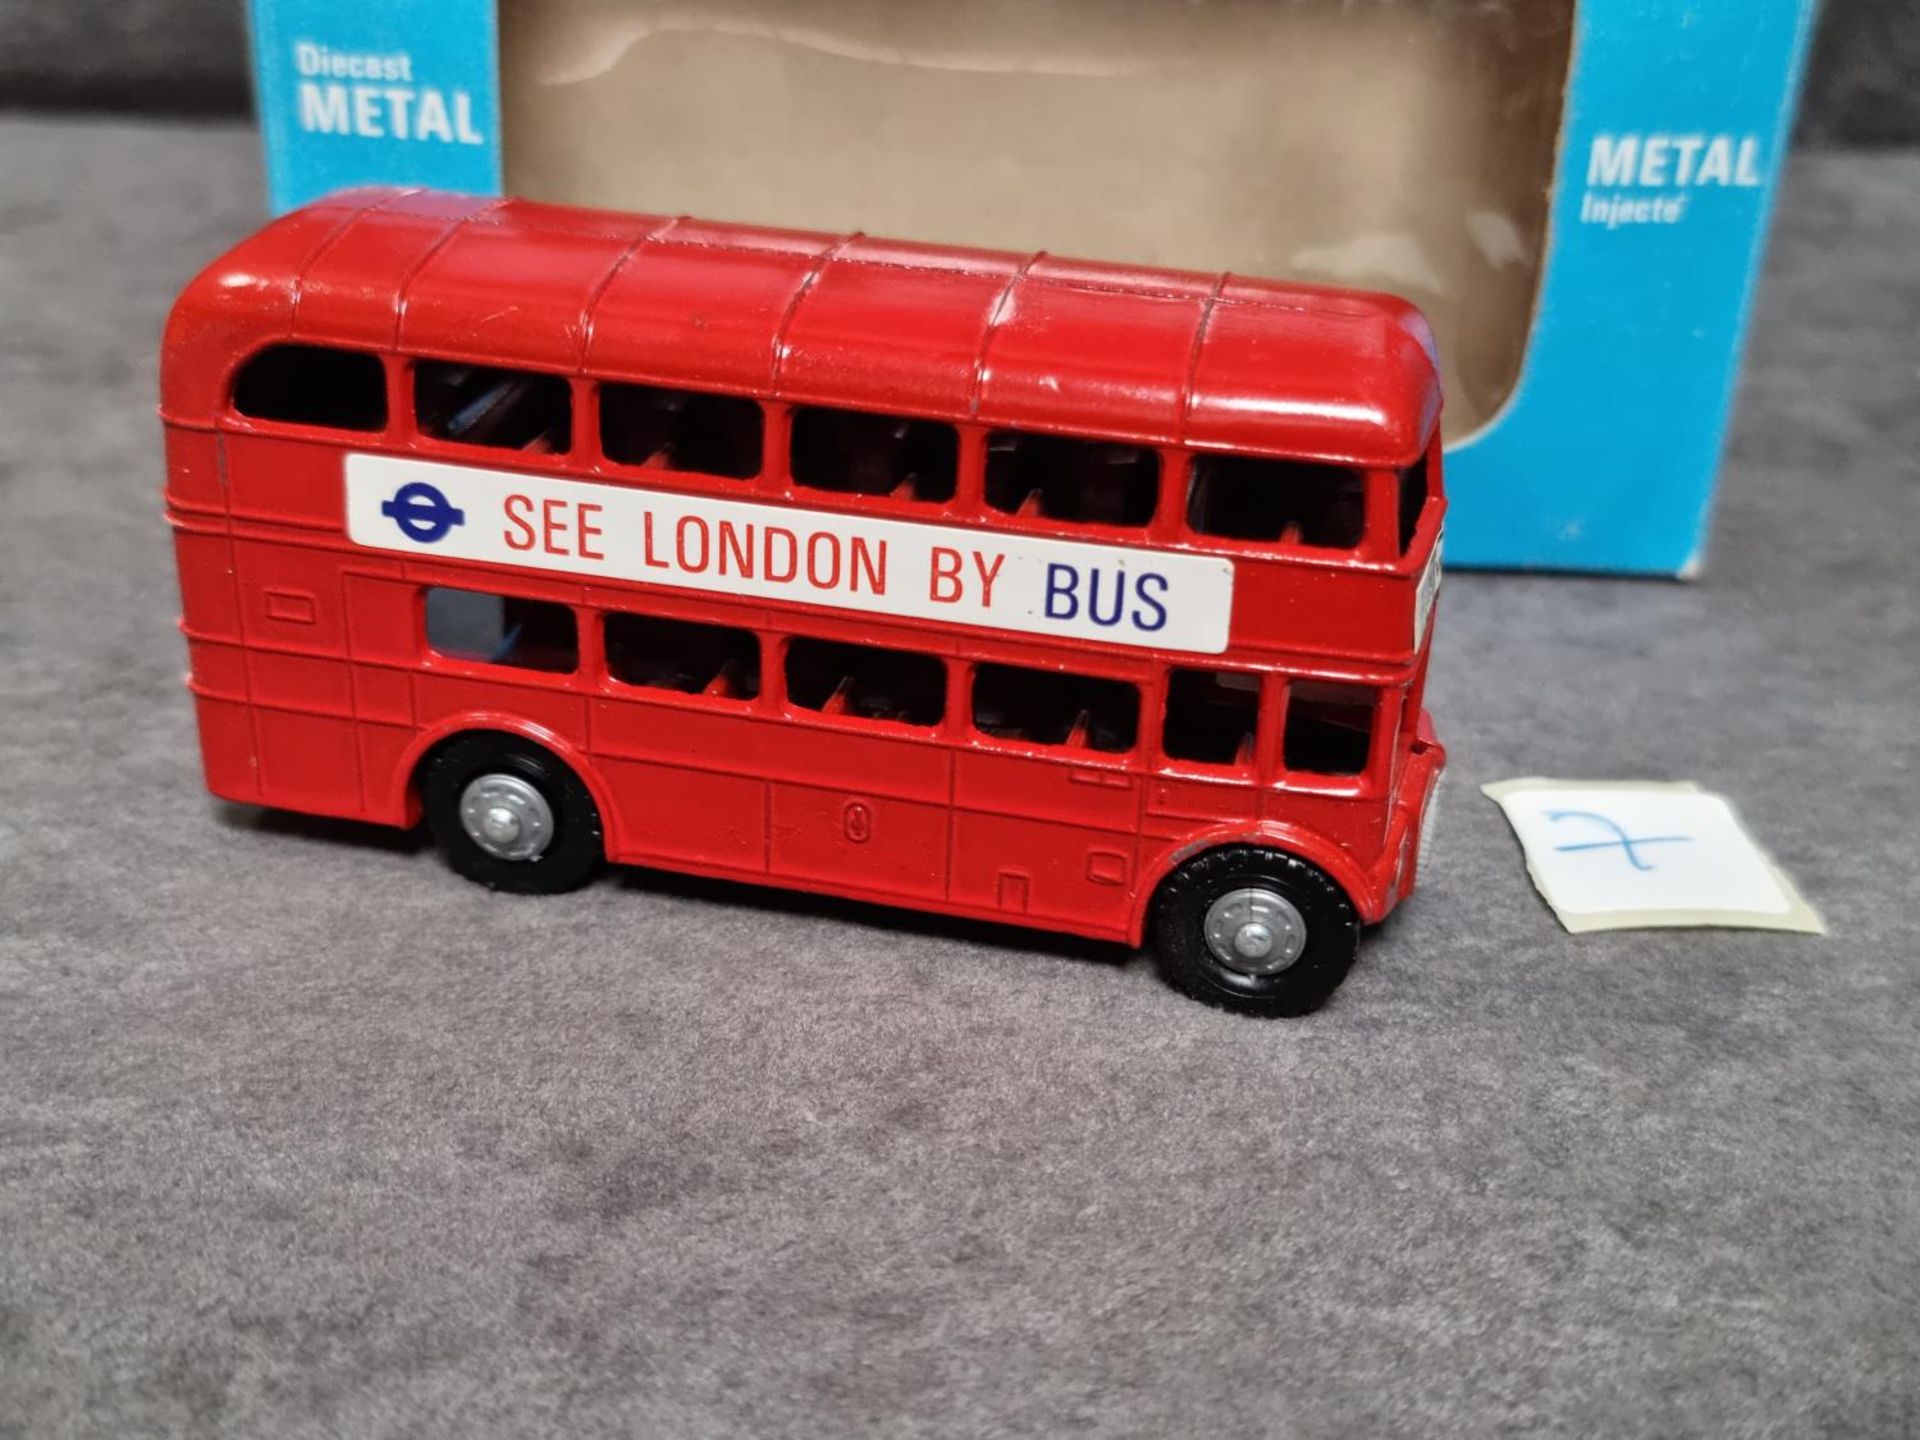 Lonestar #1259 Routemaster Bus In Box See London By Bus #29 Victoria - Image 2 of 2